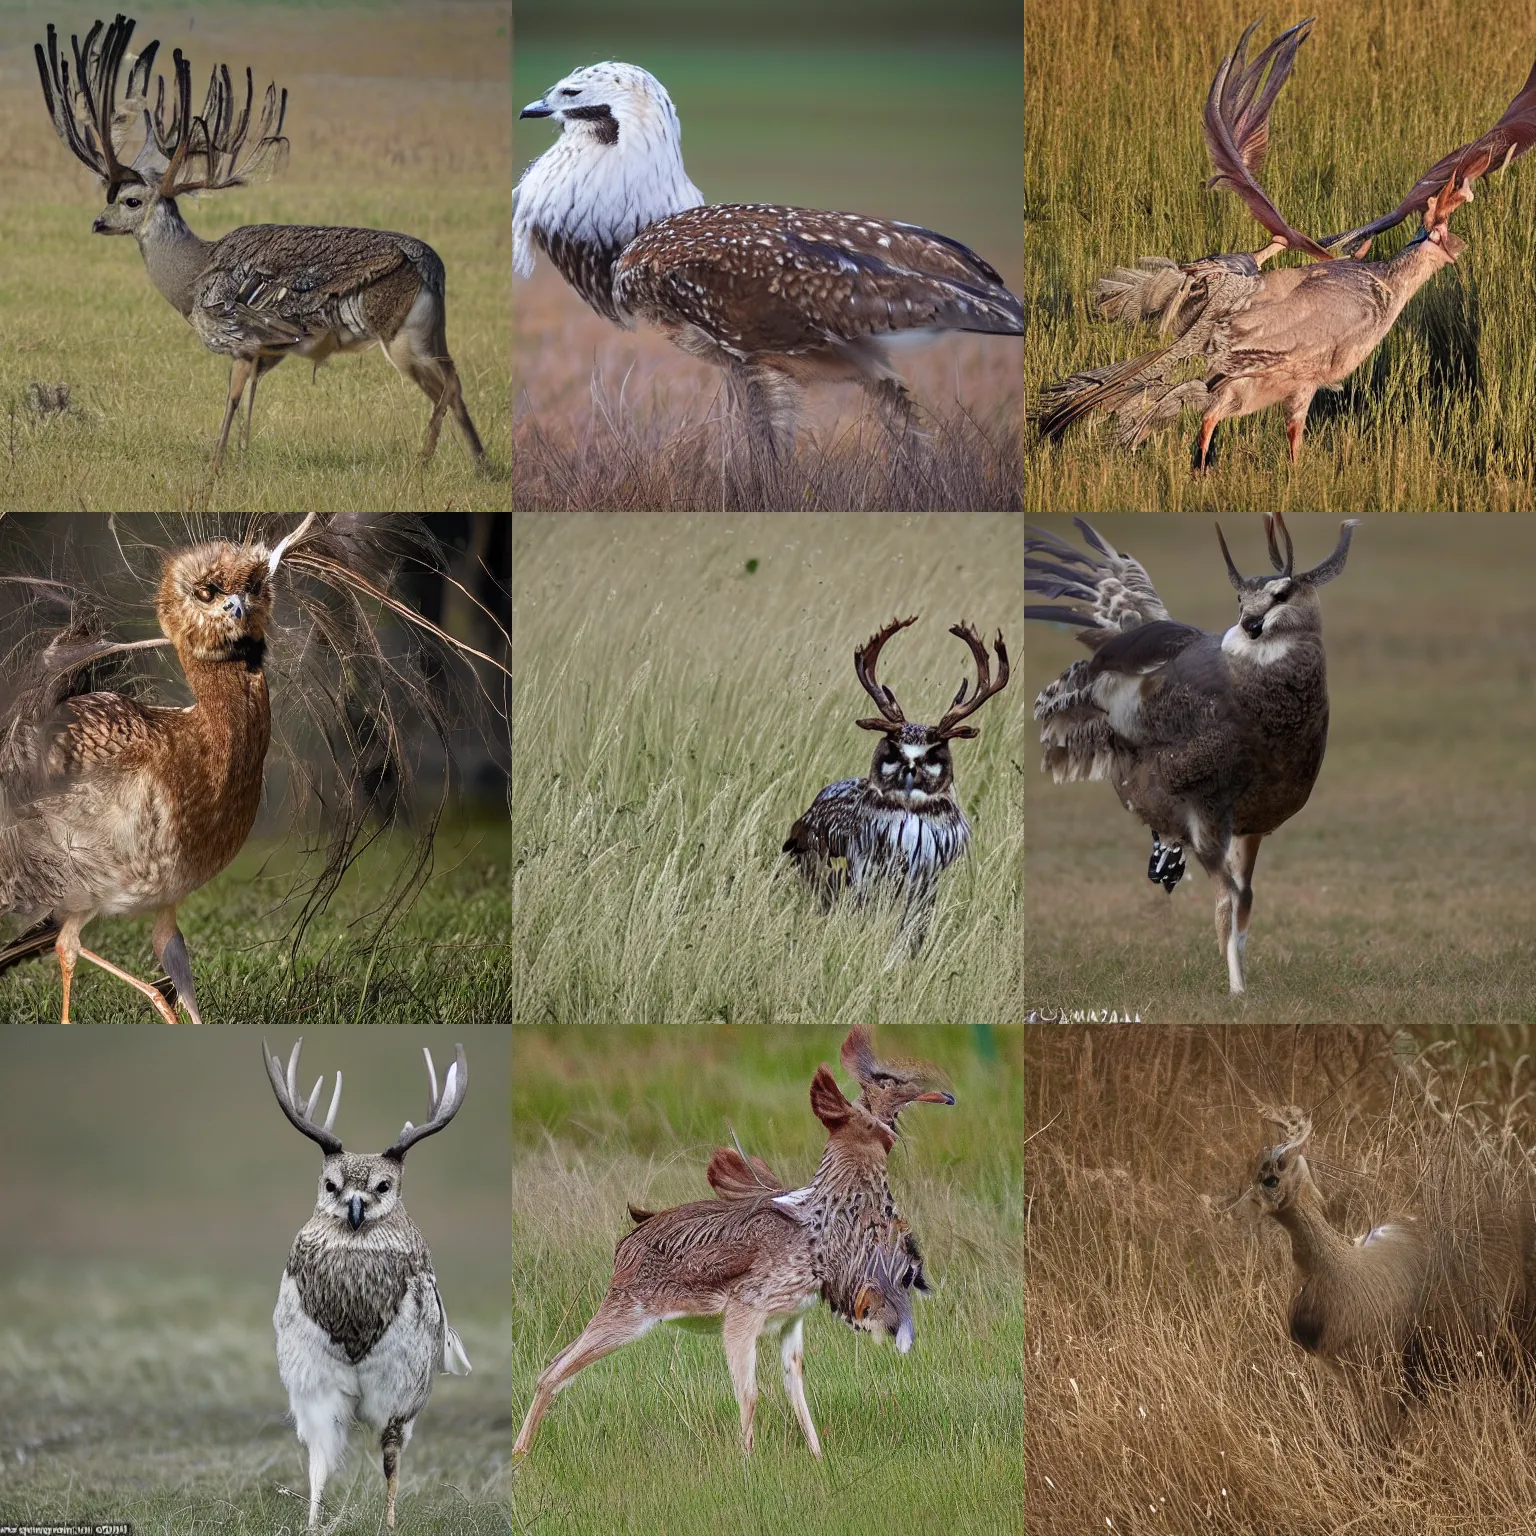 Prompt: a feathered deer with bird feathers as fur, owl feathers, full antlers, nat geo, national geographic, photo, nature photography, f16, telephoto zoom, 100mm, wide shot, walking on grass